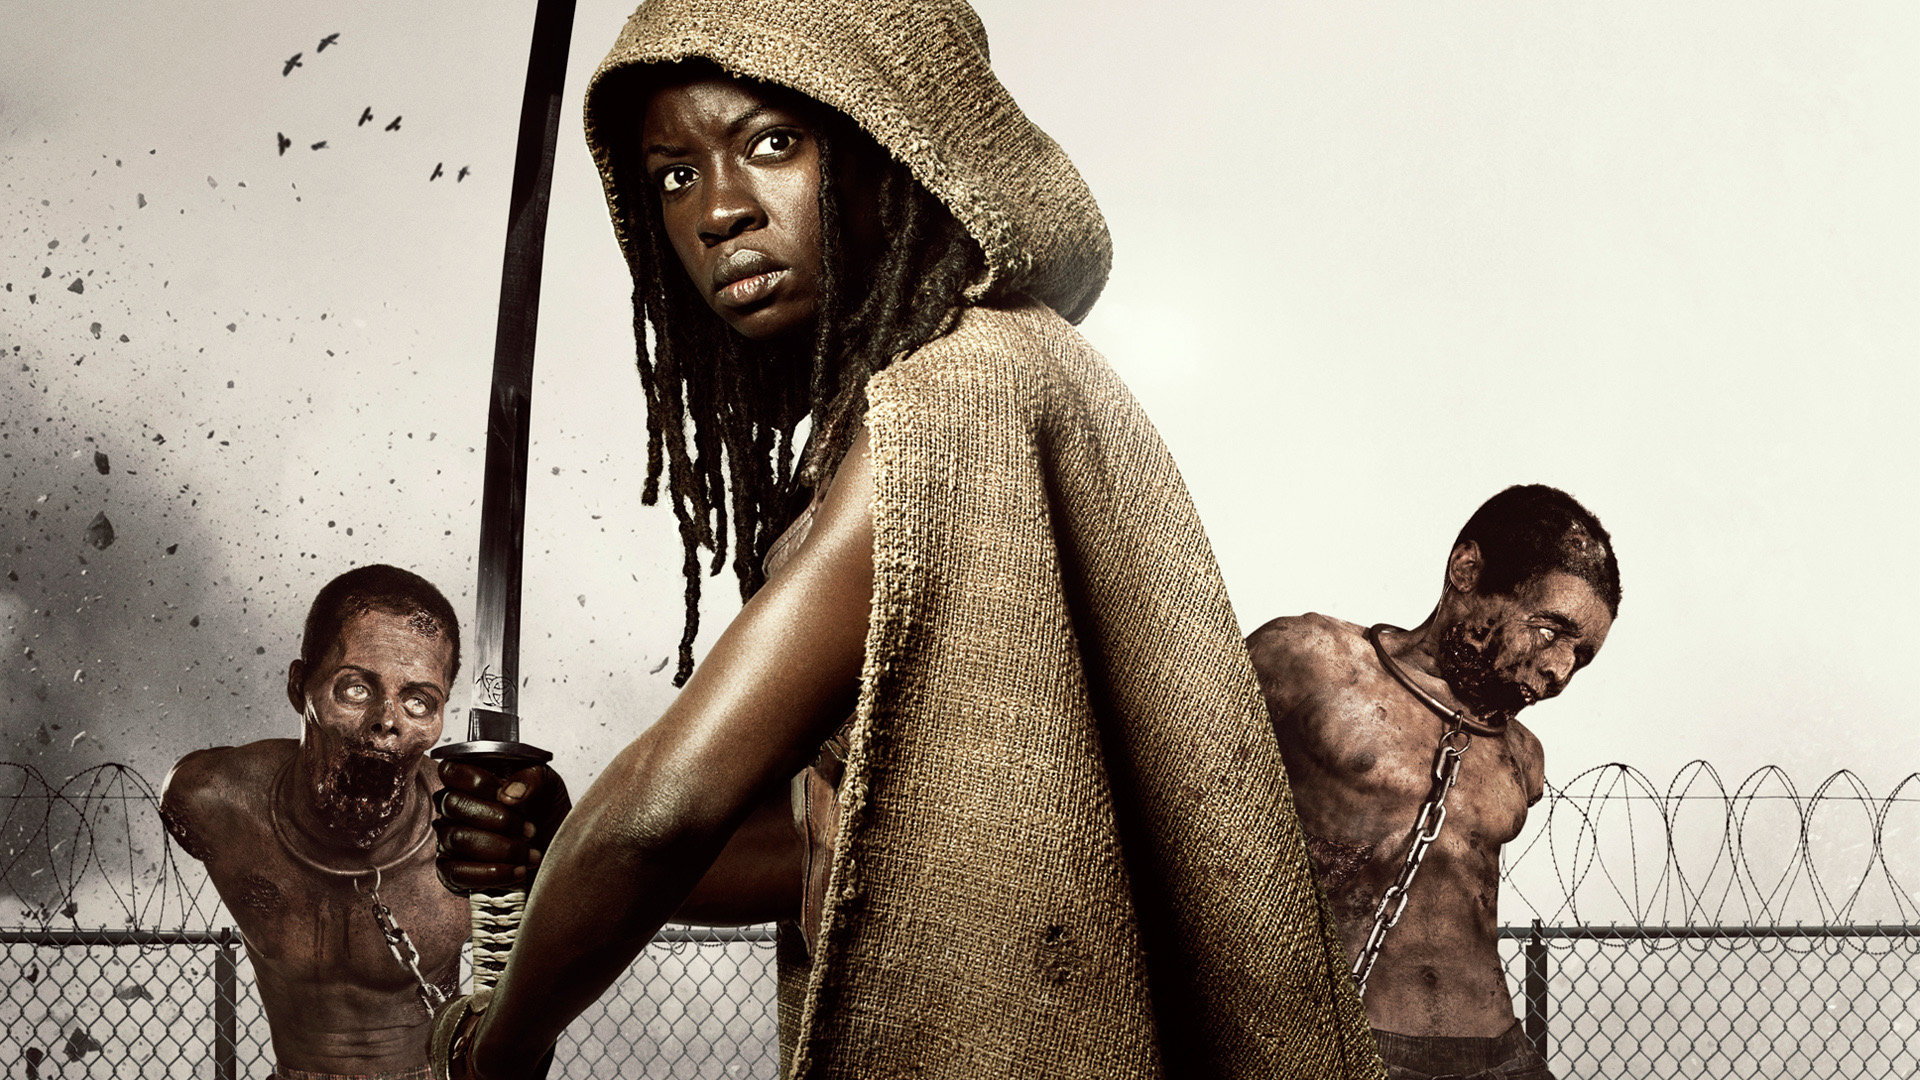 Michonne The Walking Dead Wallpapers 1920x1080 Full Hd 1080p Images, Photos, Reviews